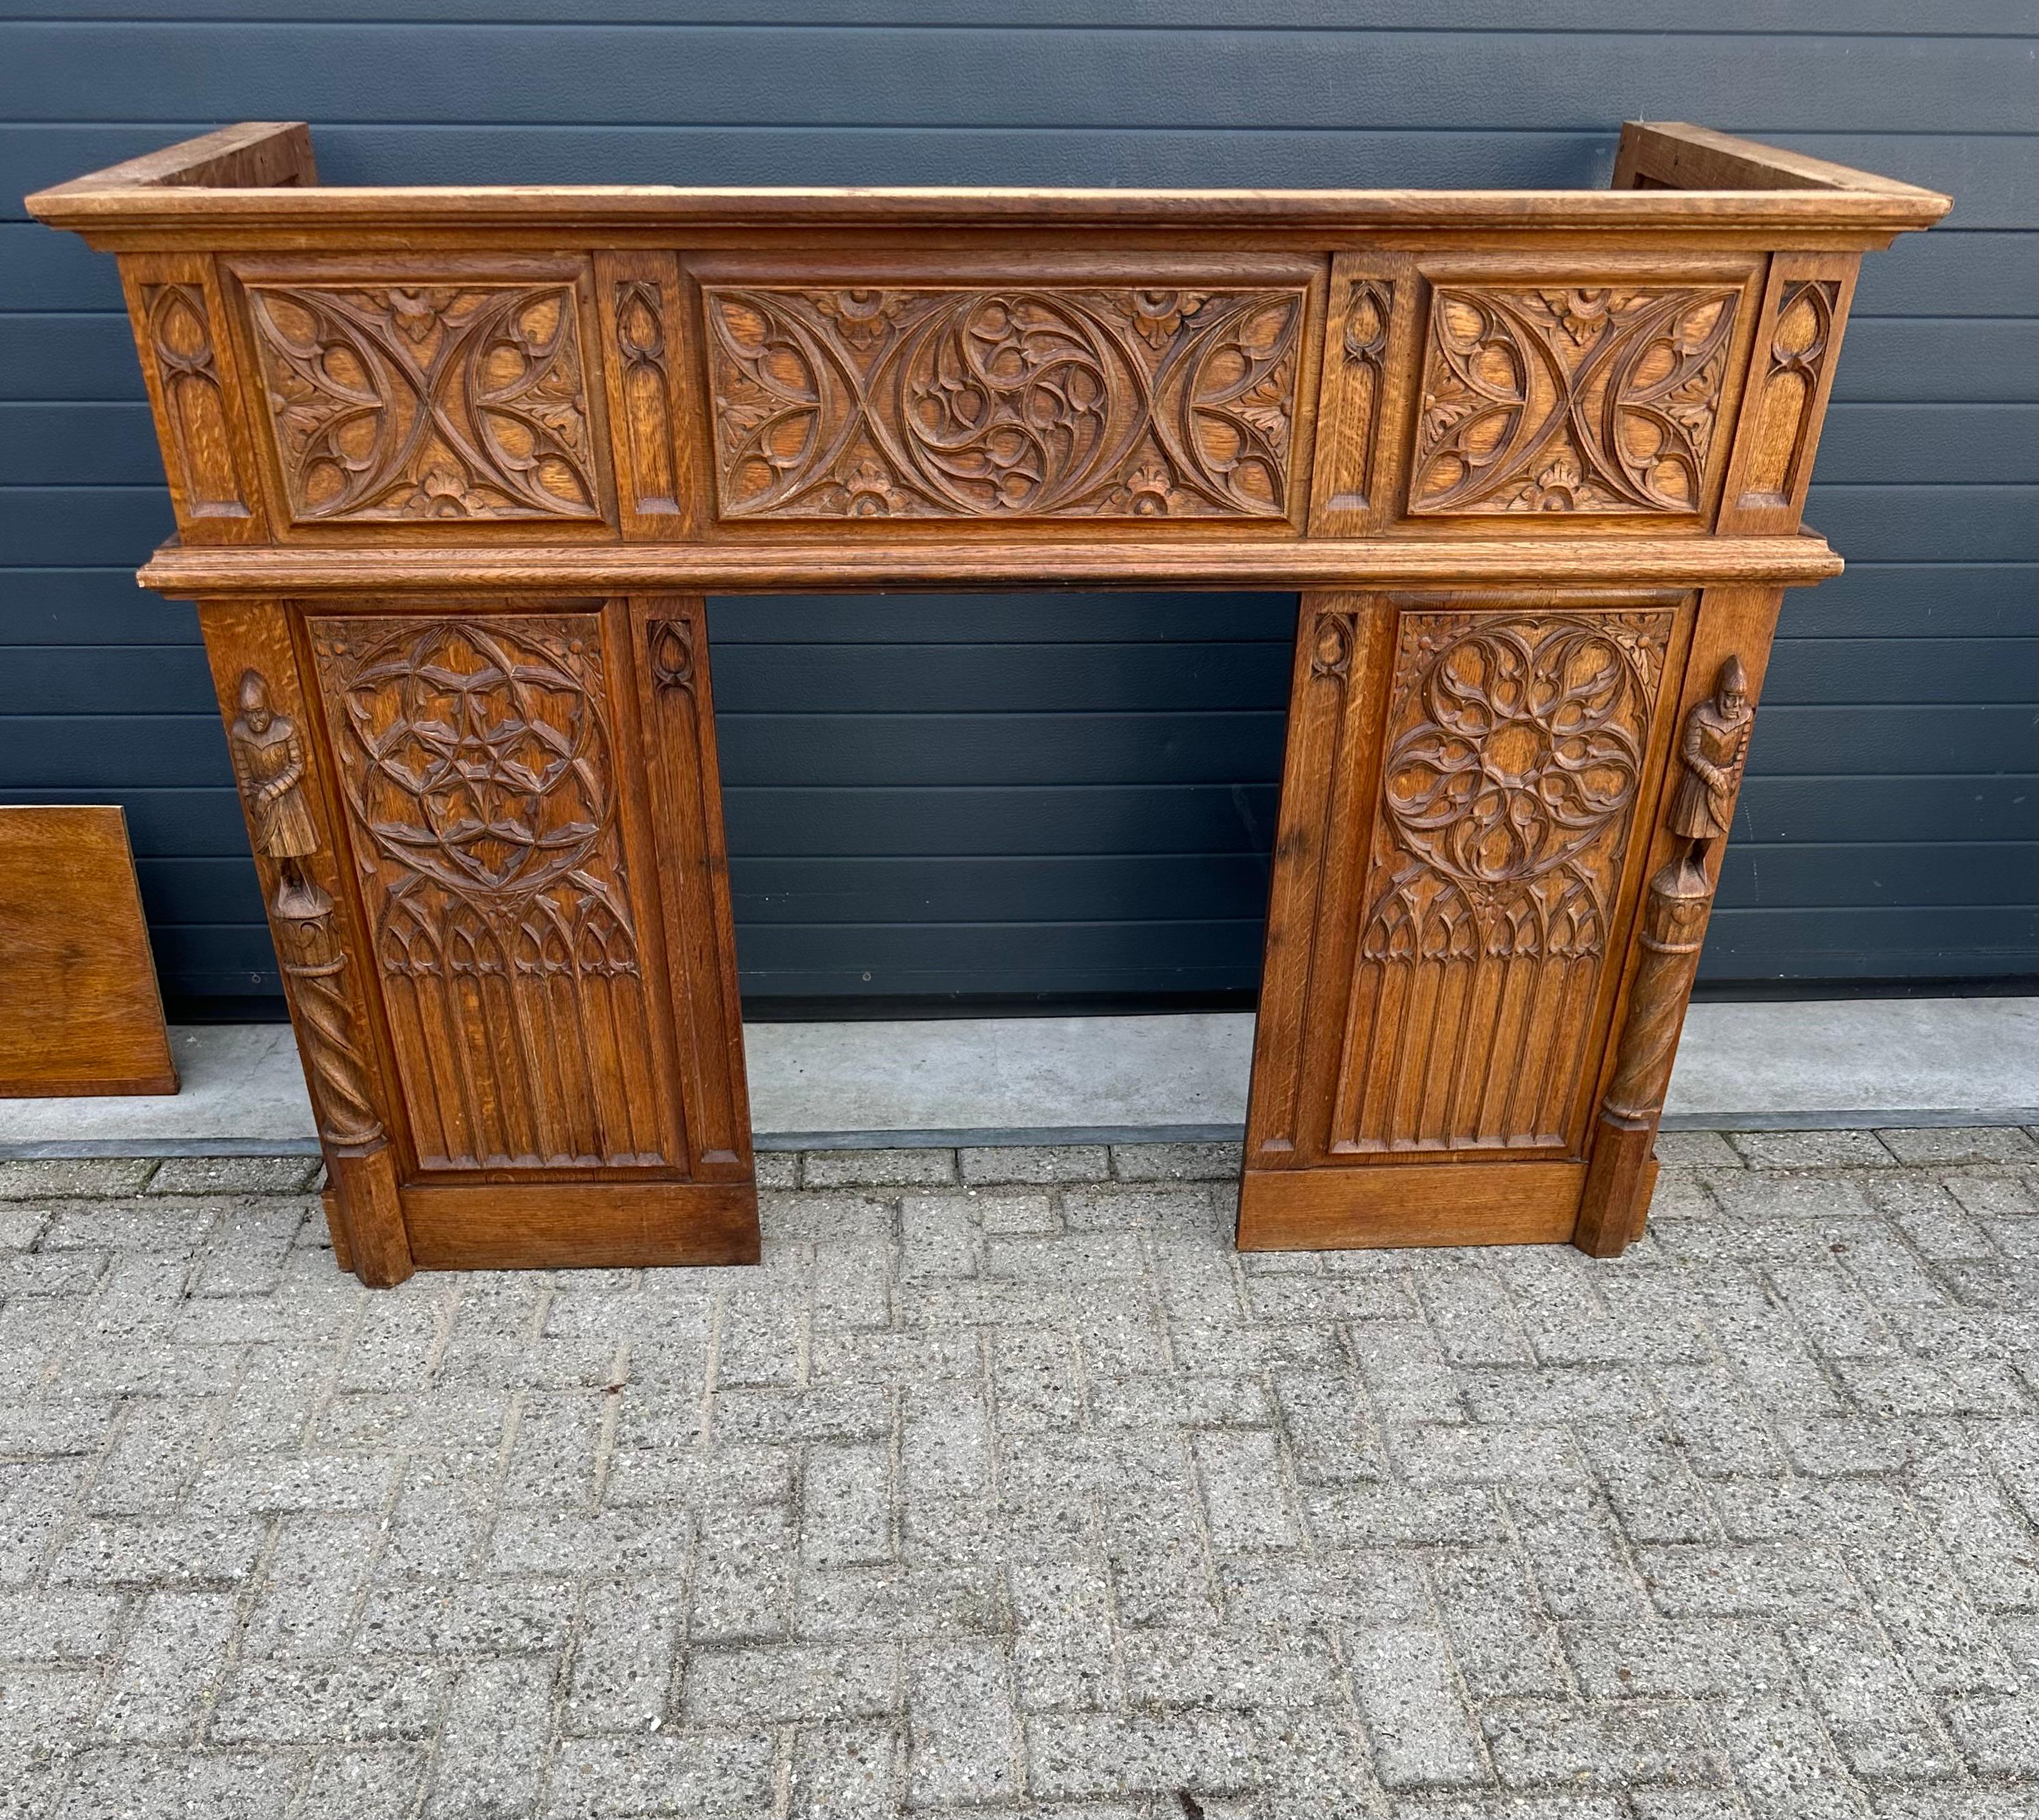 Wonderful Gothic Revival fire-place mantle surround with an amazing presence and patina.

If you like Gothic Revival furniture then we are certain you will like this quality made and quality carved, antique Gothic mantle. This fine and unique